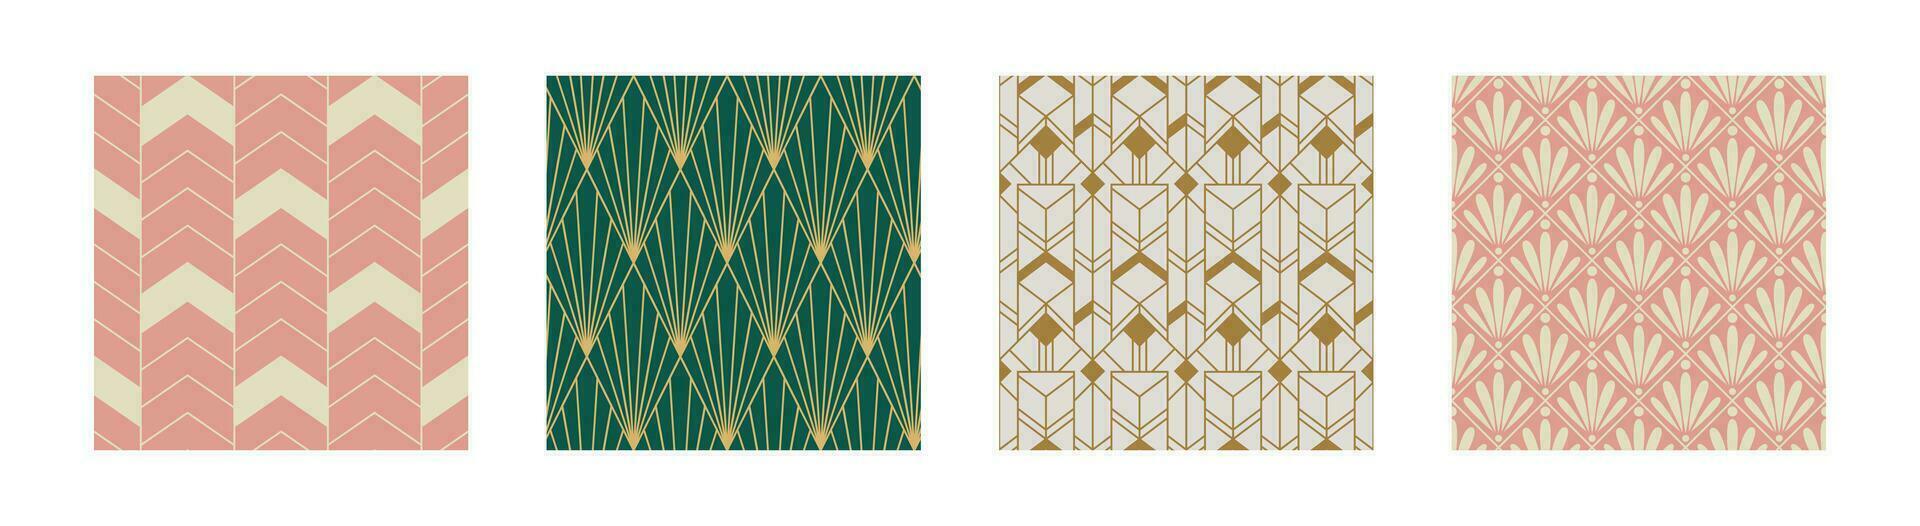 Set of Vintage Art Deco Seamless Pattern. Line art geometric gold shapes. Modern ornaments vector illustration. Gatsby retro elegant background for fabric, wallpaper or wrapping